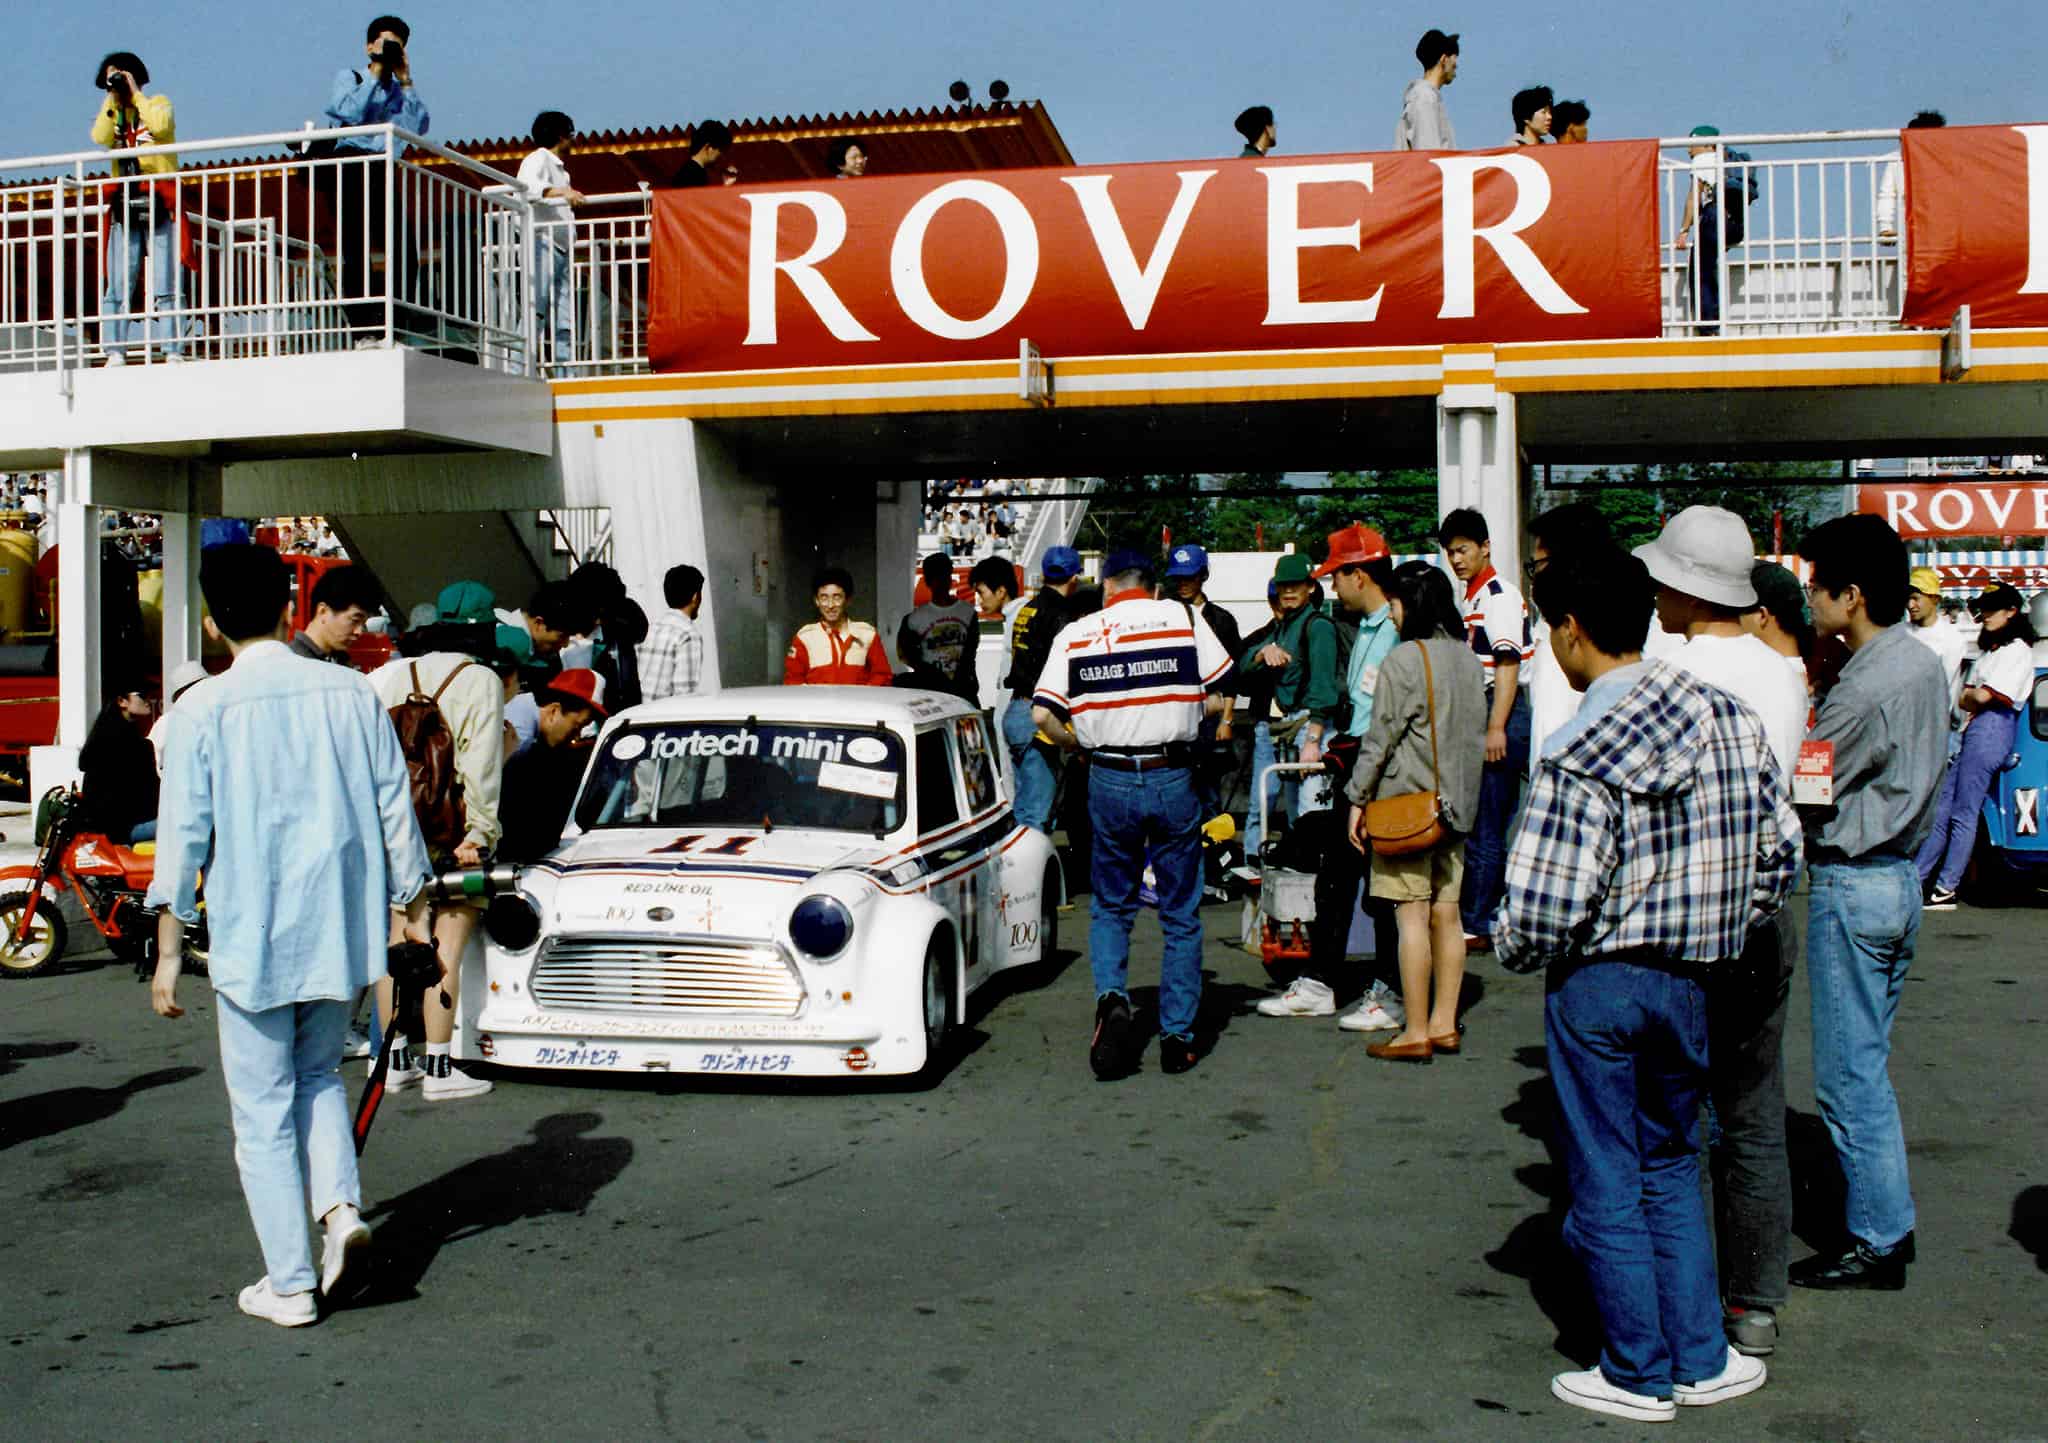 Fortech Mini always attracted a crowd of polite Japanese fans, especially when SCCA decals were given away